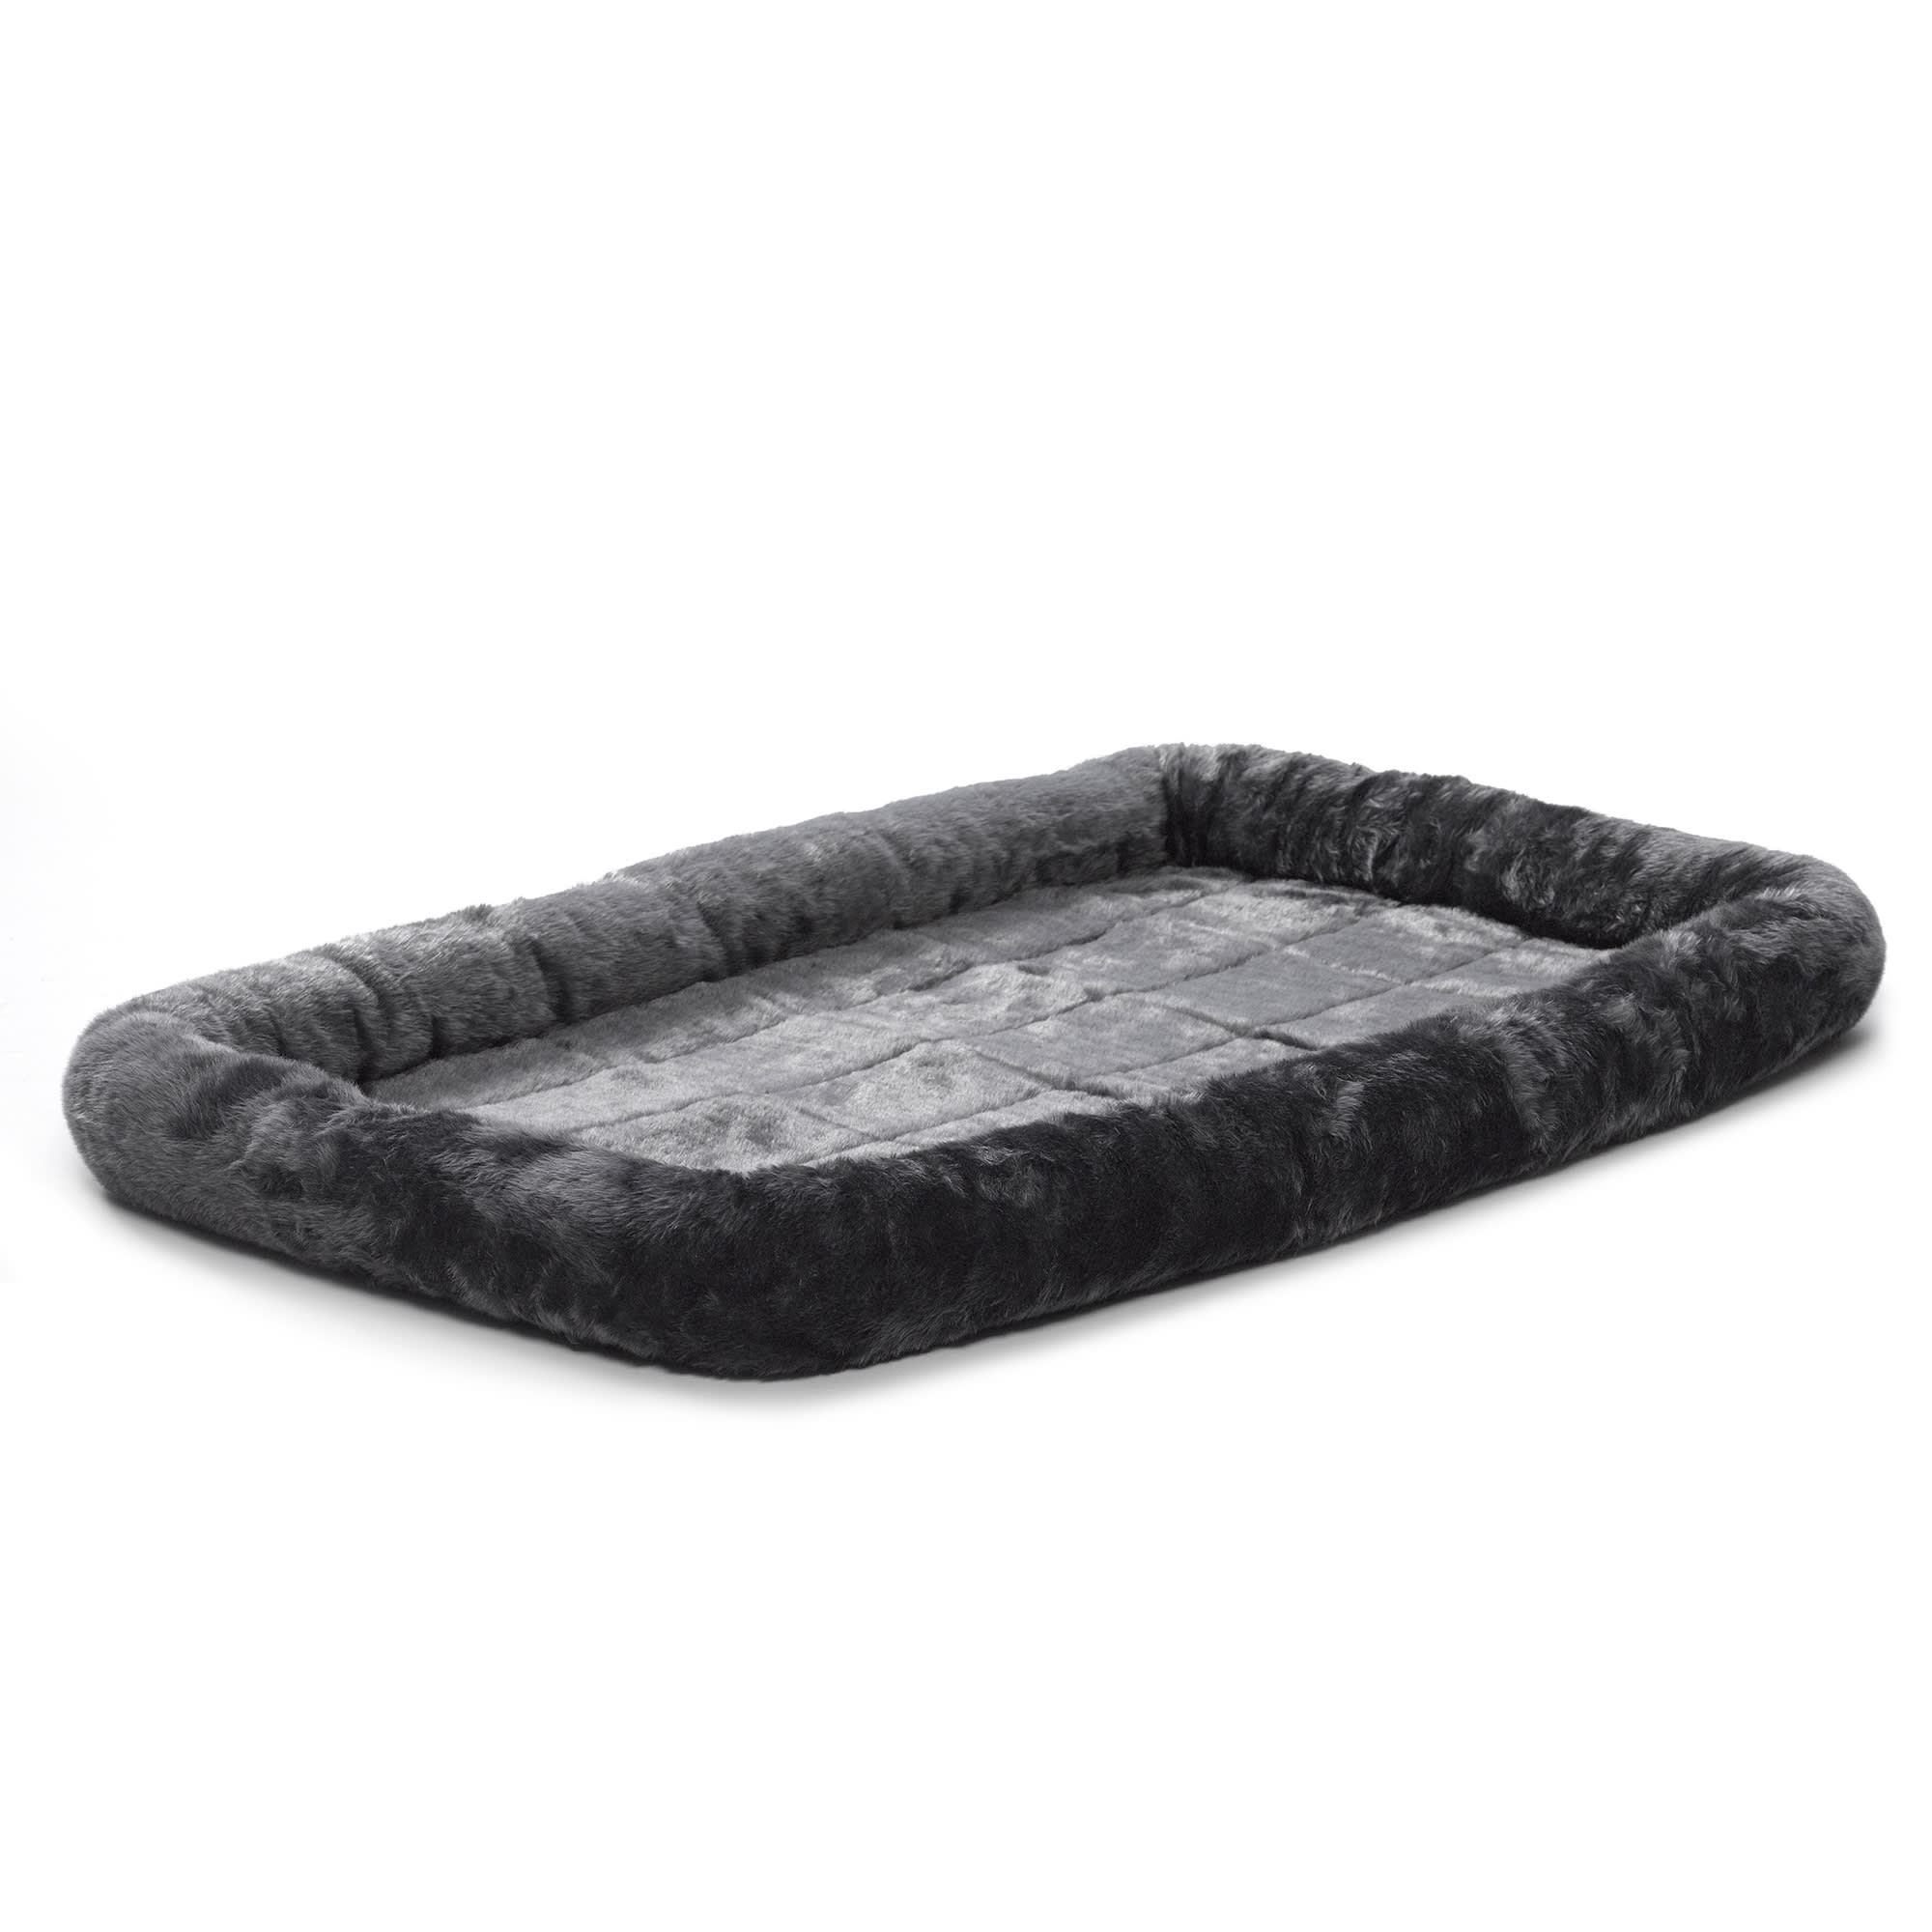 Photos - Bed & Furniture Midwest Quiet Time Bolster Gray Dog Bed, 48" L X 30" W, XX-Large, 